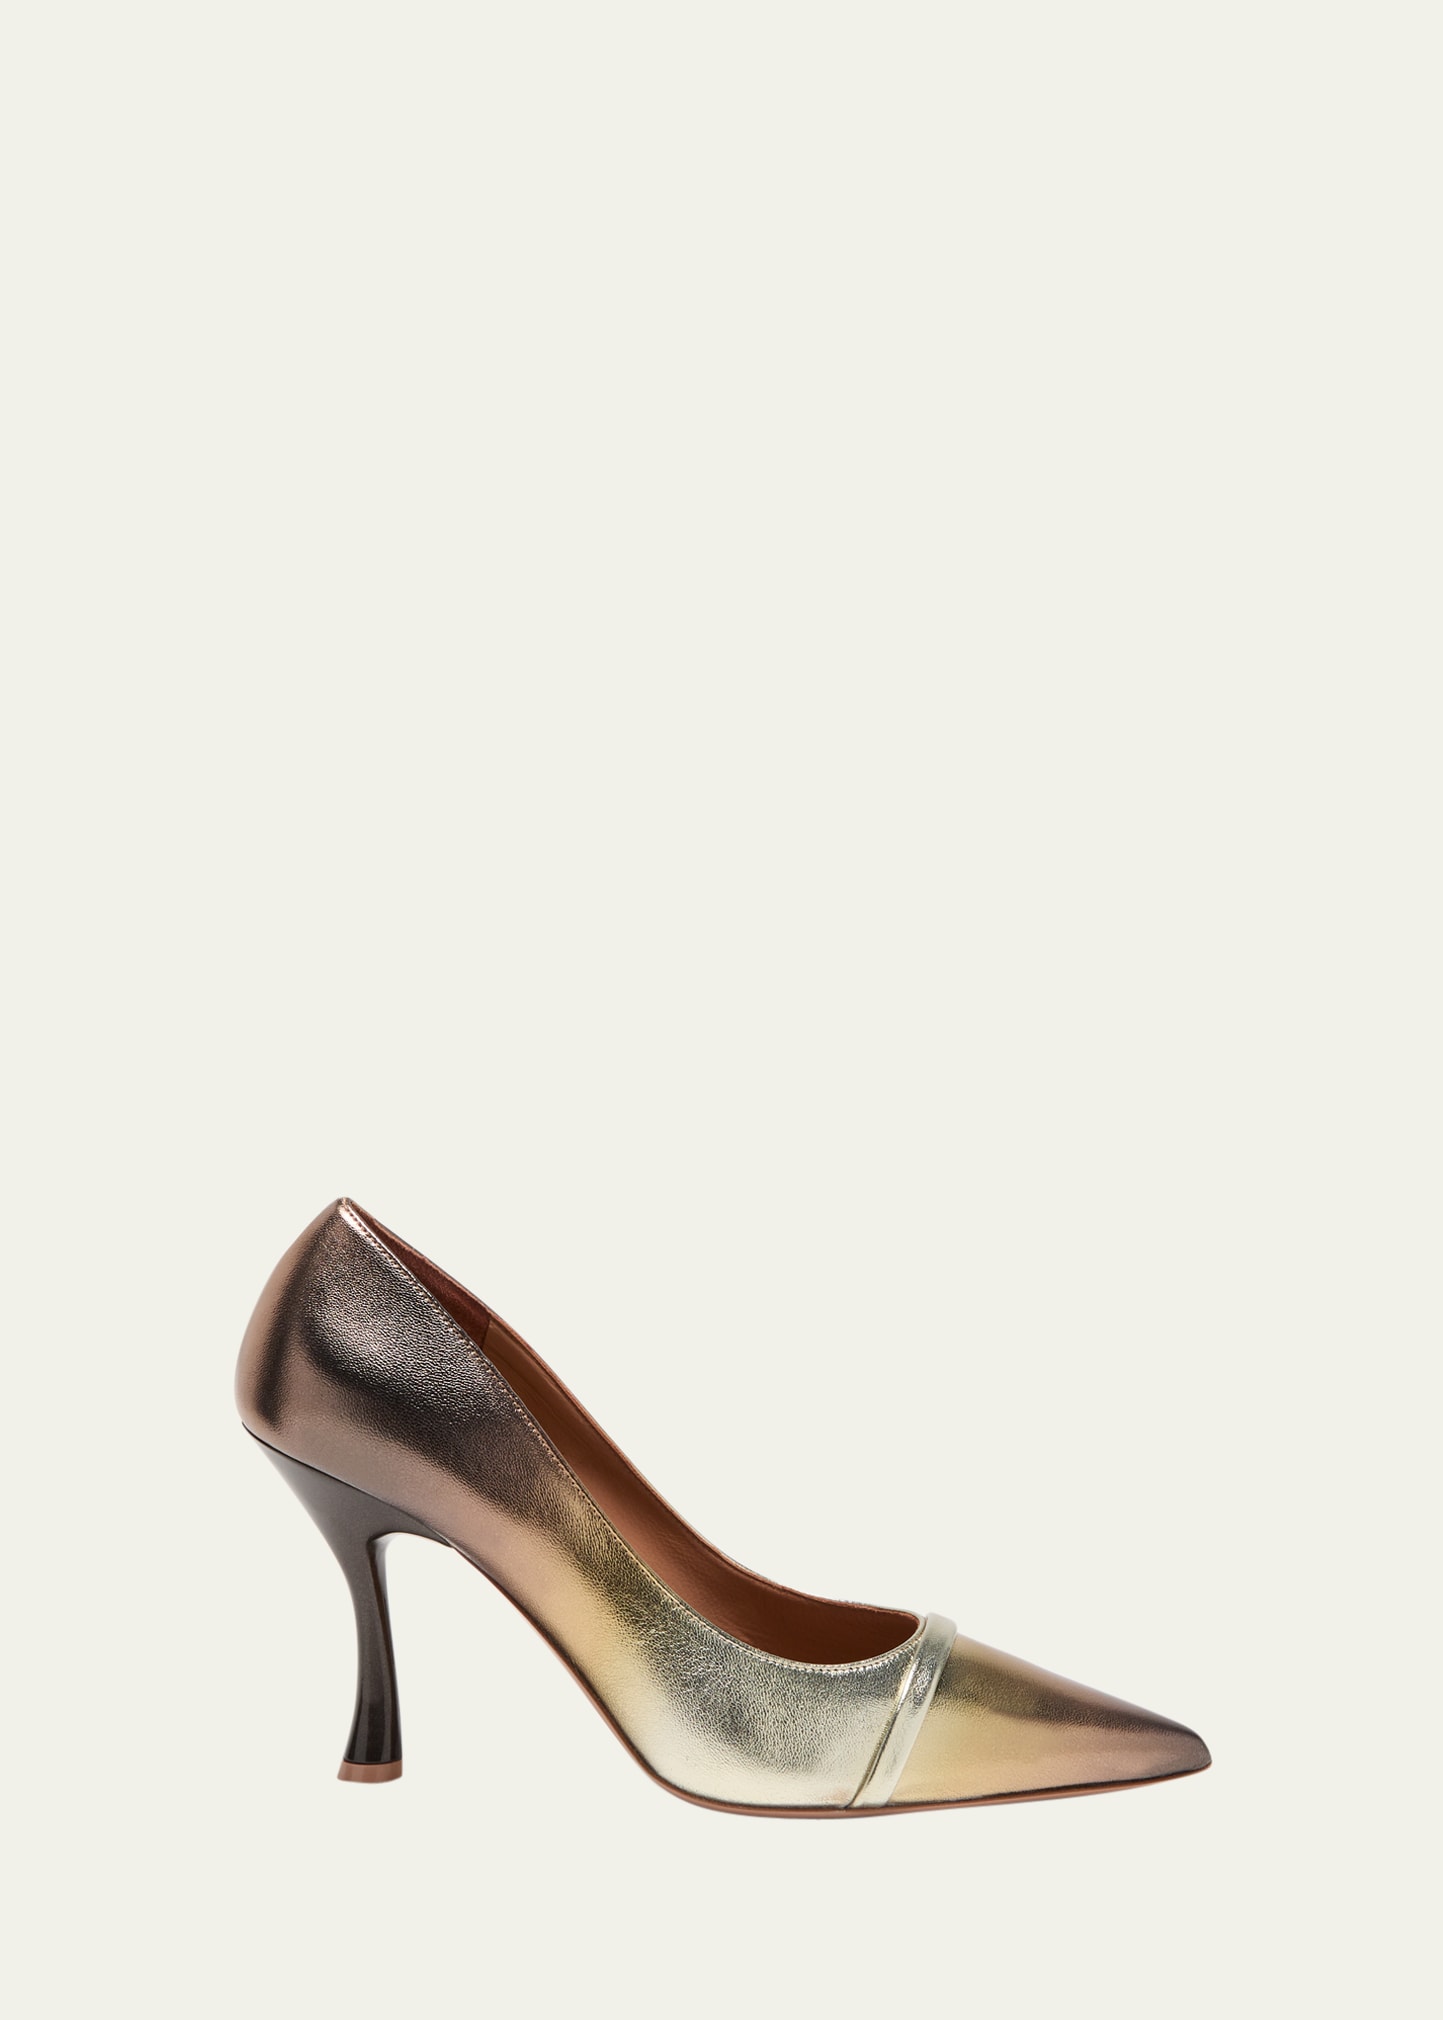 Malone Souliers Metallic Ombre Leather Pumps In Bronze Degrade